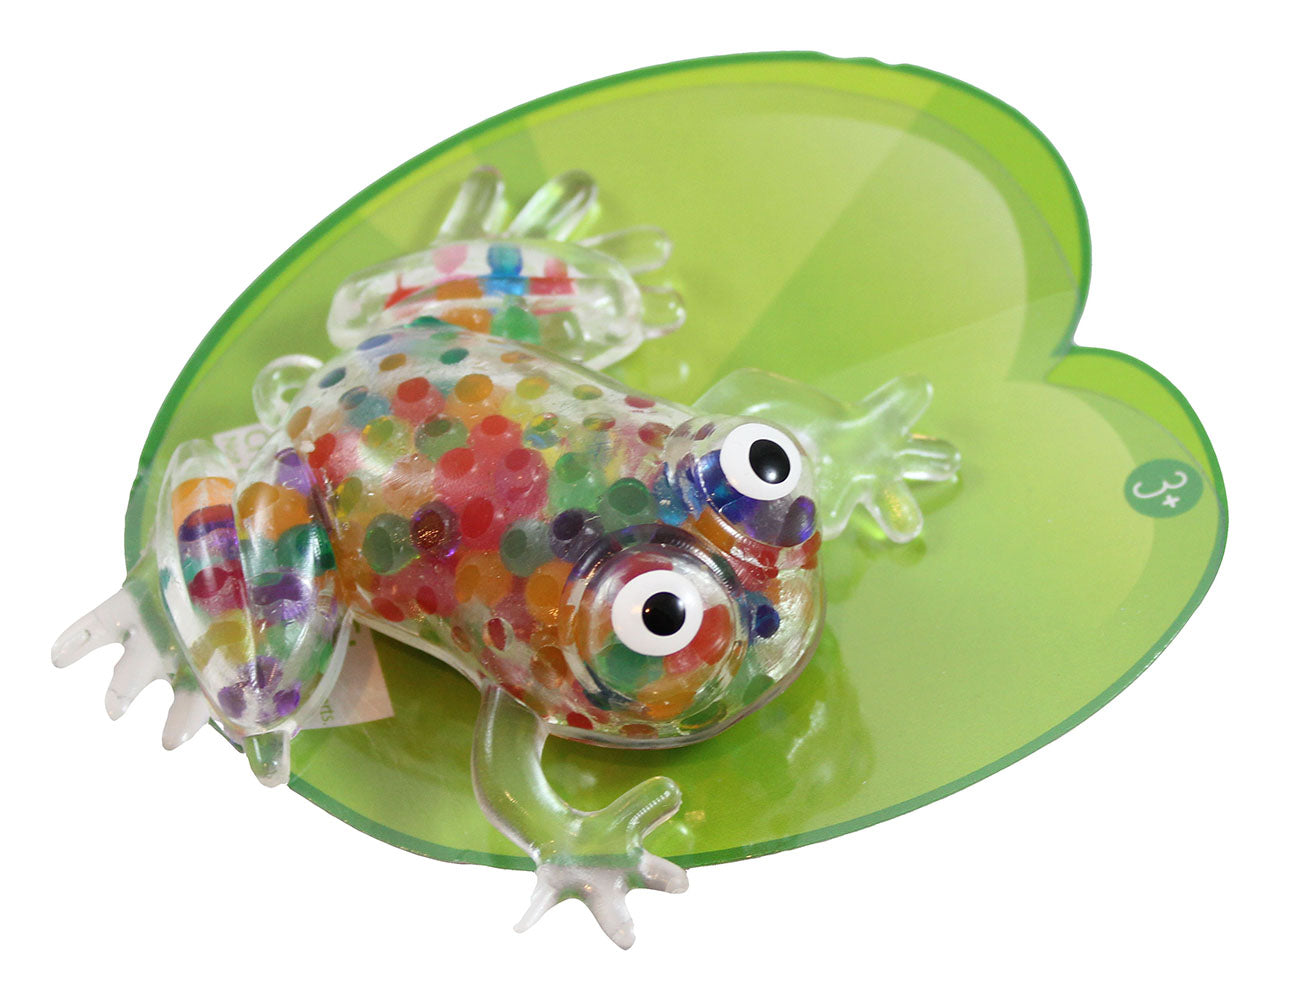 Curious Minds Busy 1 Cute Frog Rainbow Water Bead Filled Squeeze Stress Balls - Squishy Toy - Sensory Fidget